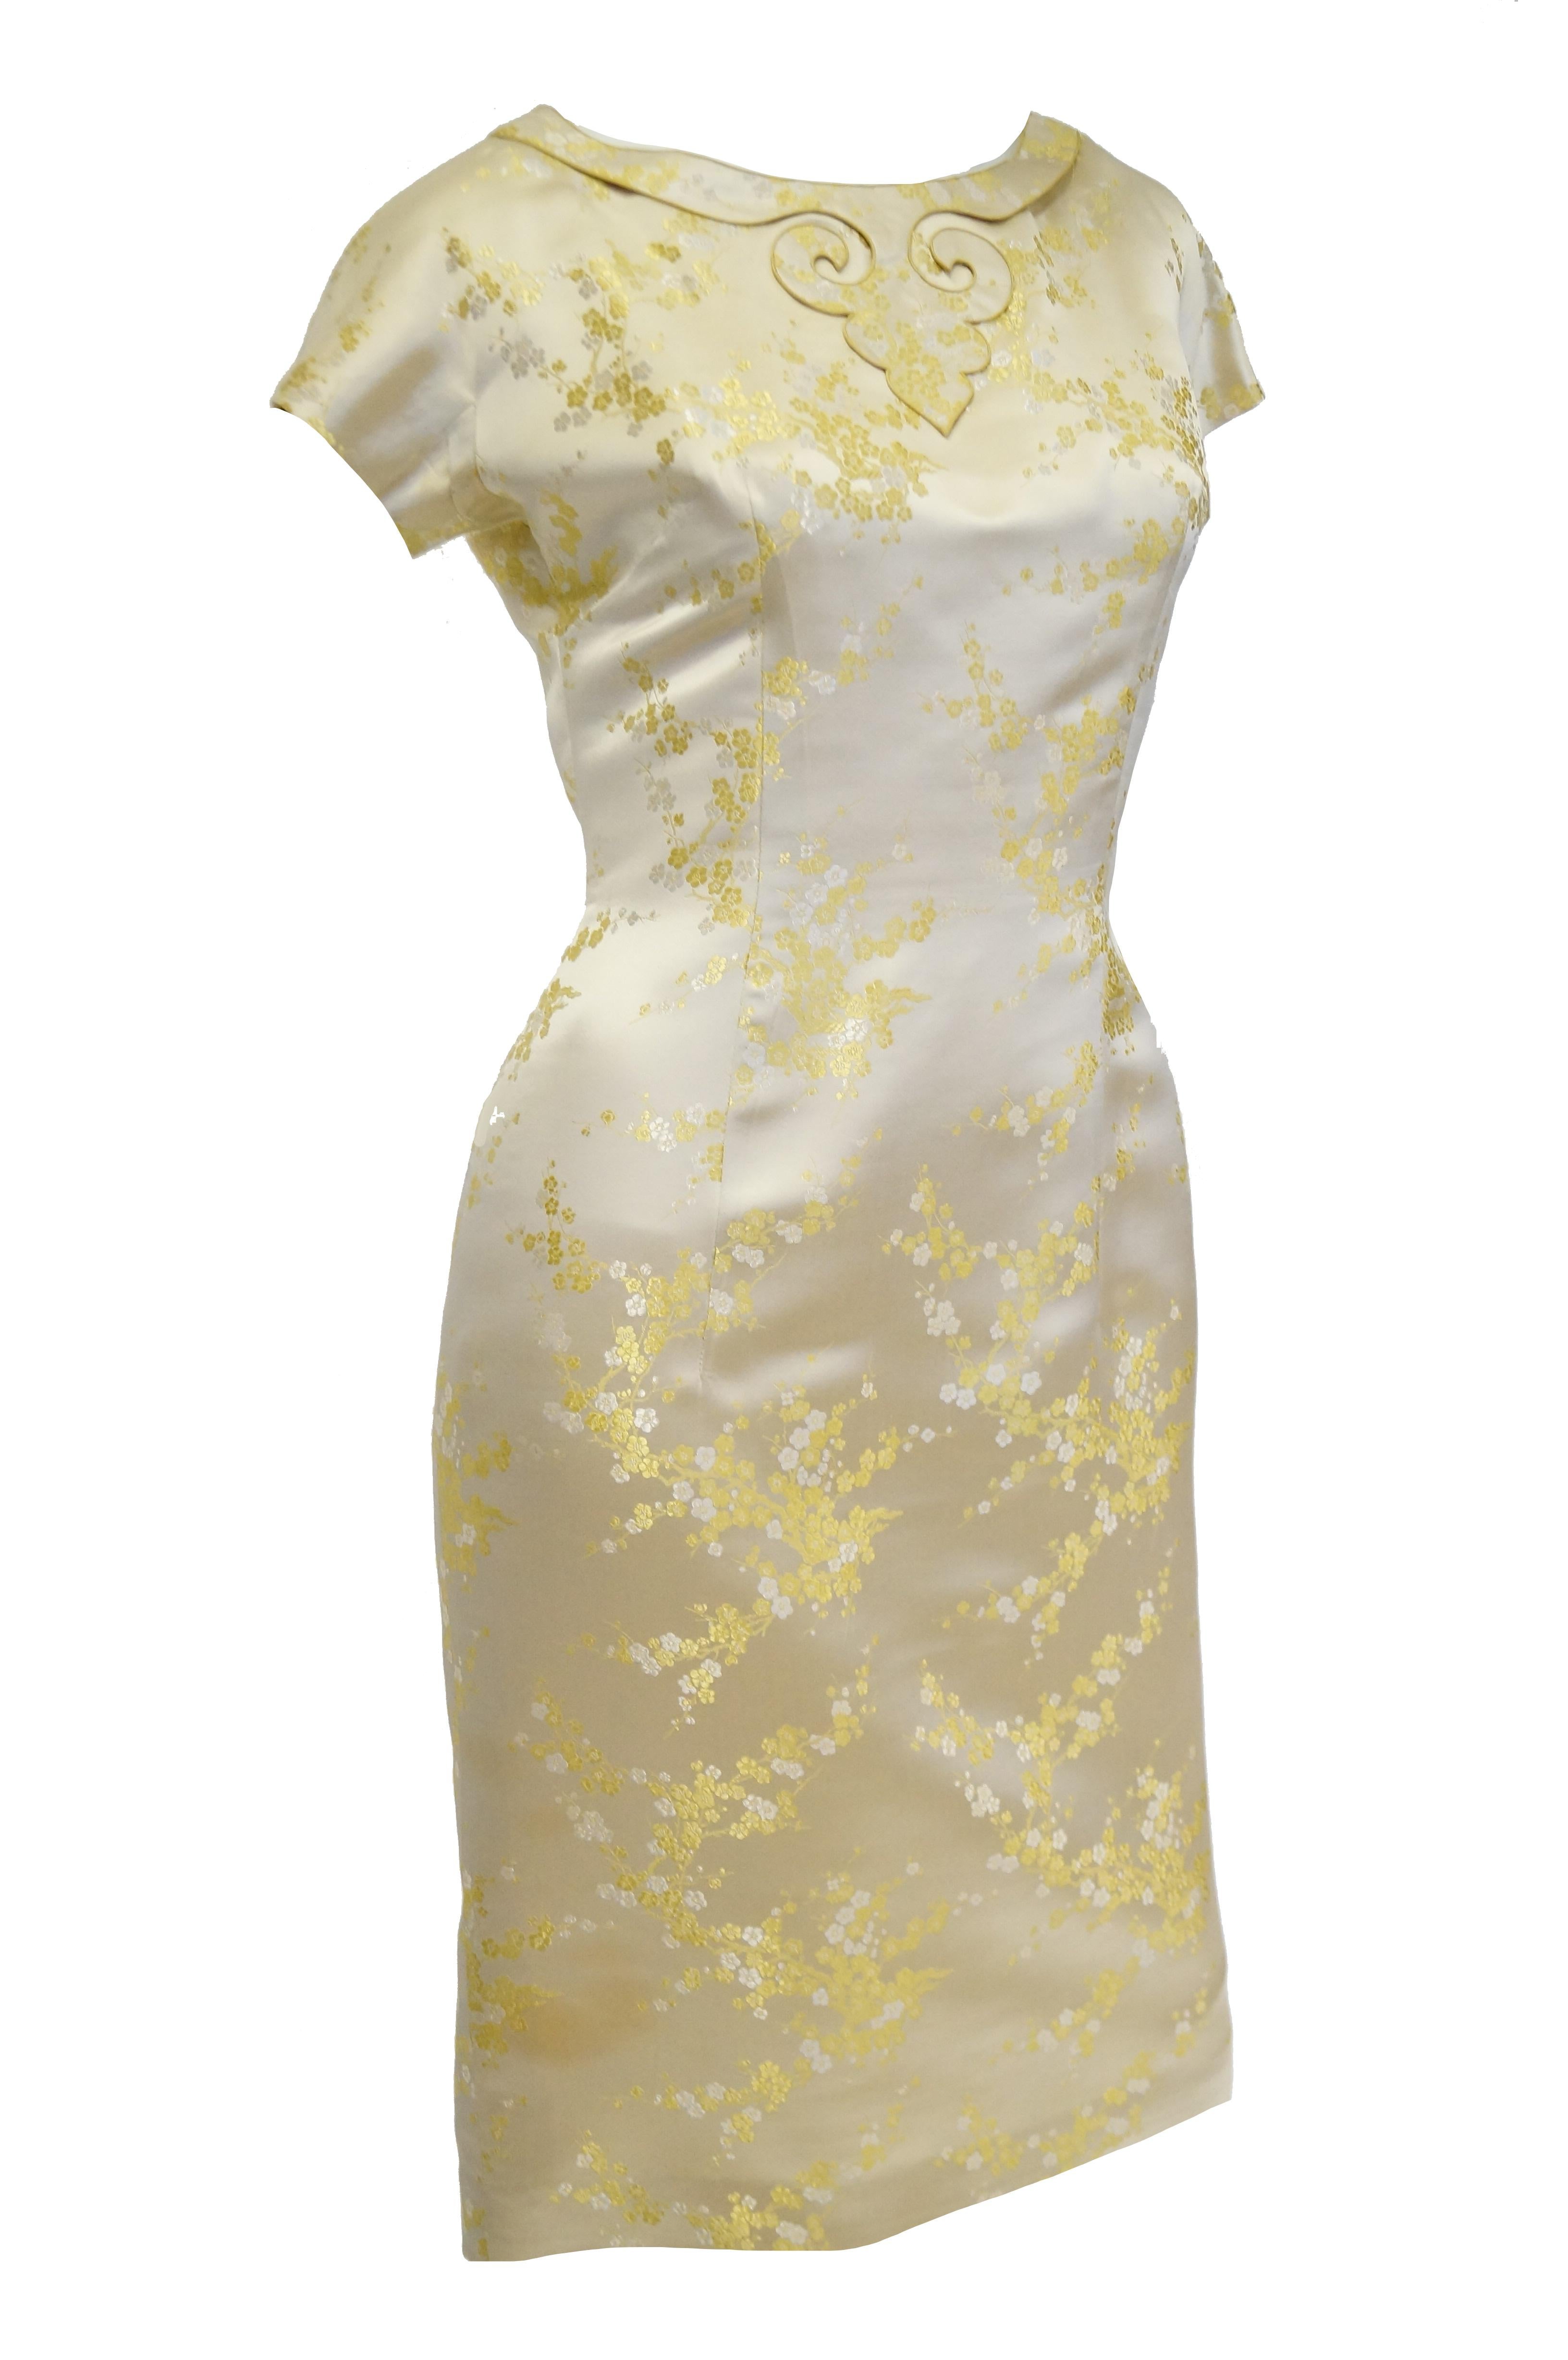  1960s Hong Kong Gold Cherry Blossom Floral Brocade Cocktail Dress and Coat For Sale 3